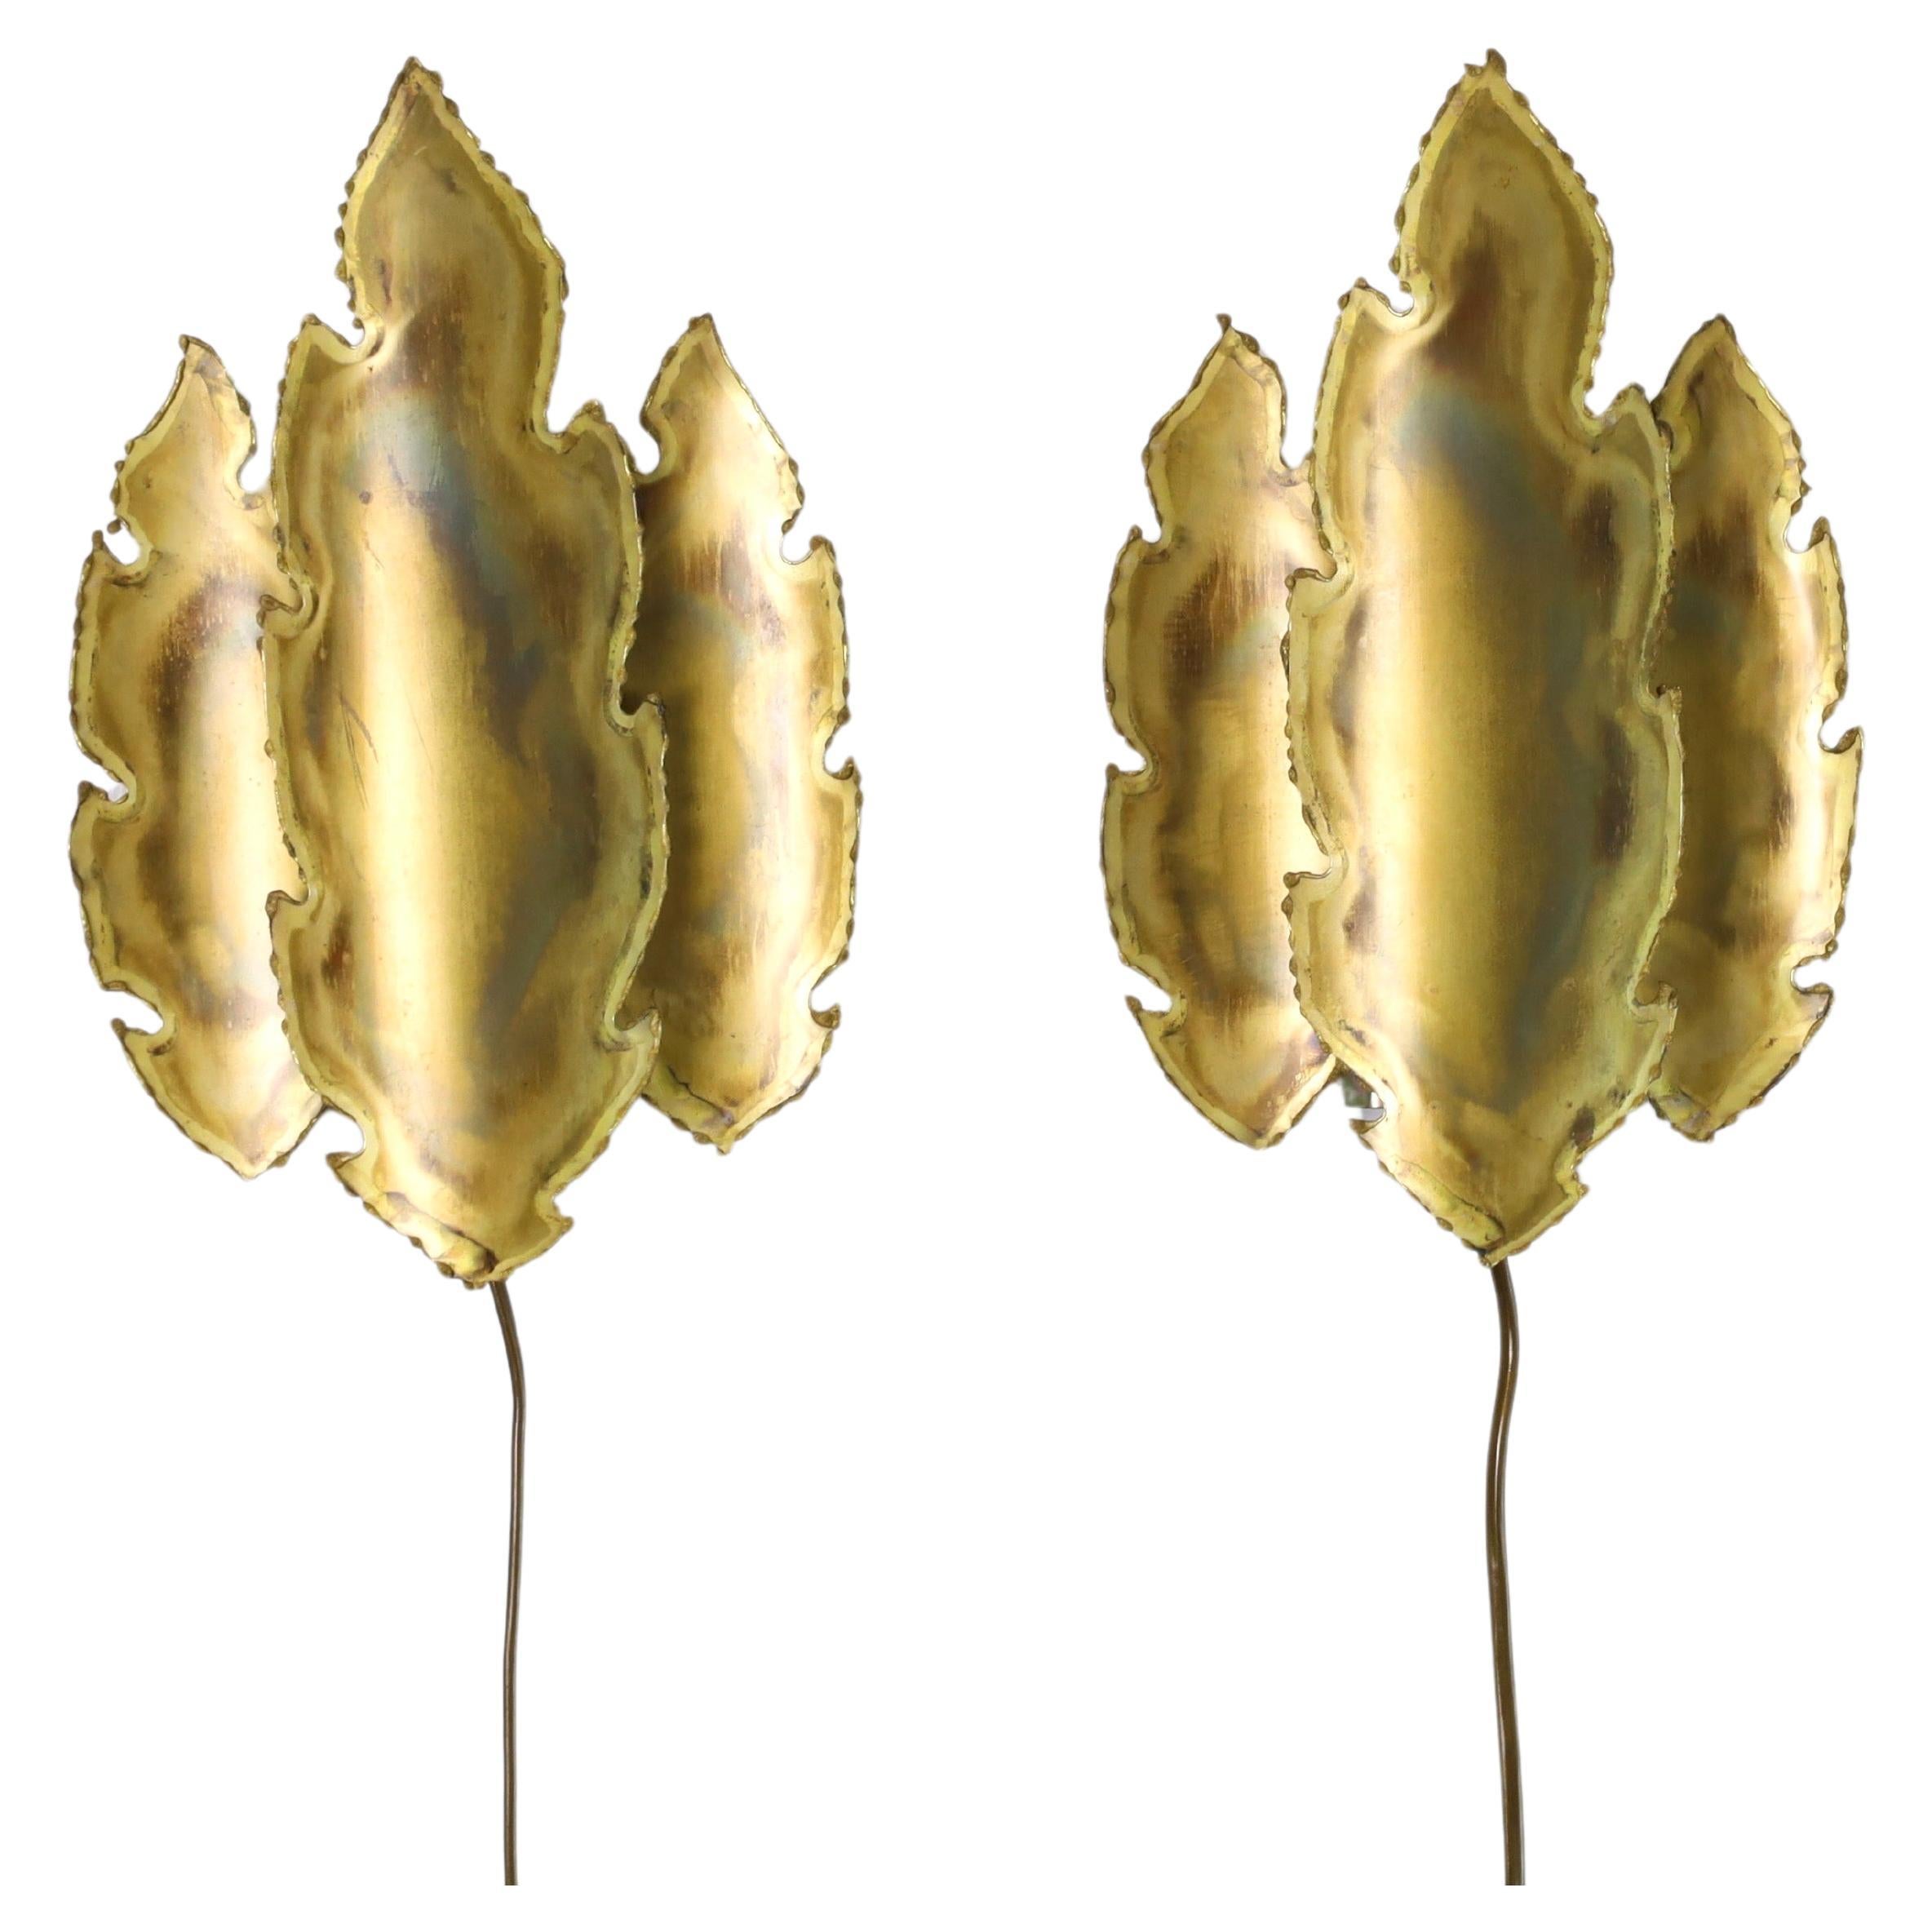 Pair of flame-cut brass sconces designed by renowned Svend Aage Holm Sørensen in the 1960s. Captivating interplay of light and shadow, adding a warm and inviting atmosphere to any to any beautiful space.

* A pair (2) of leaf-shaped flame cut brass